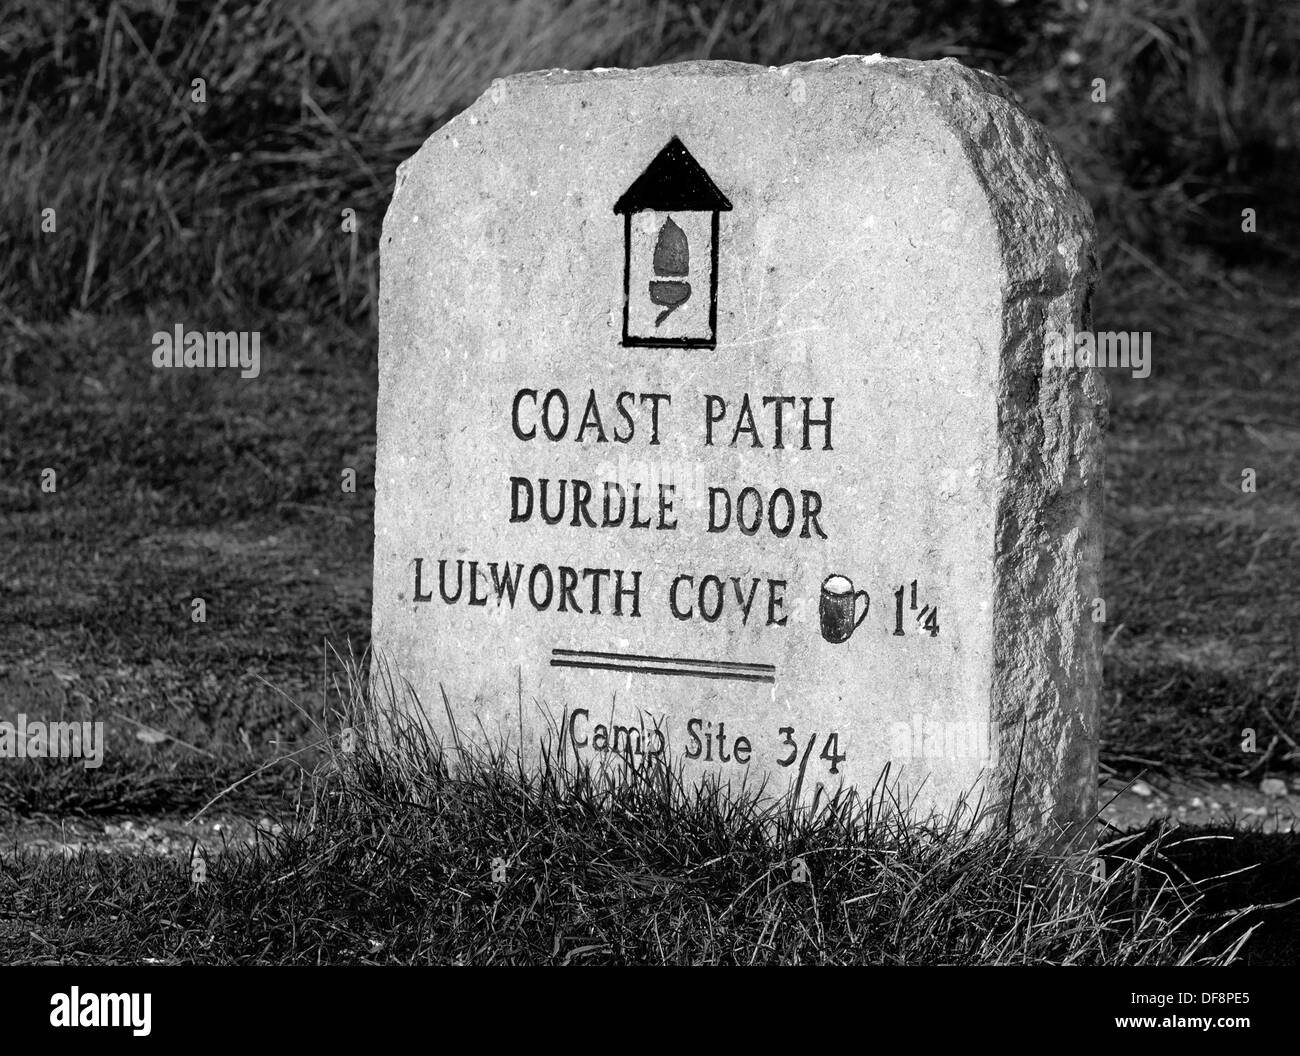 A Old Stone Path/Route Marker Marks The Coastal Walk From Durdle Door To Lulworth Cove, Dorset, England, Uk. (Black and white) Stock Photo